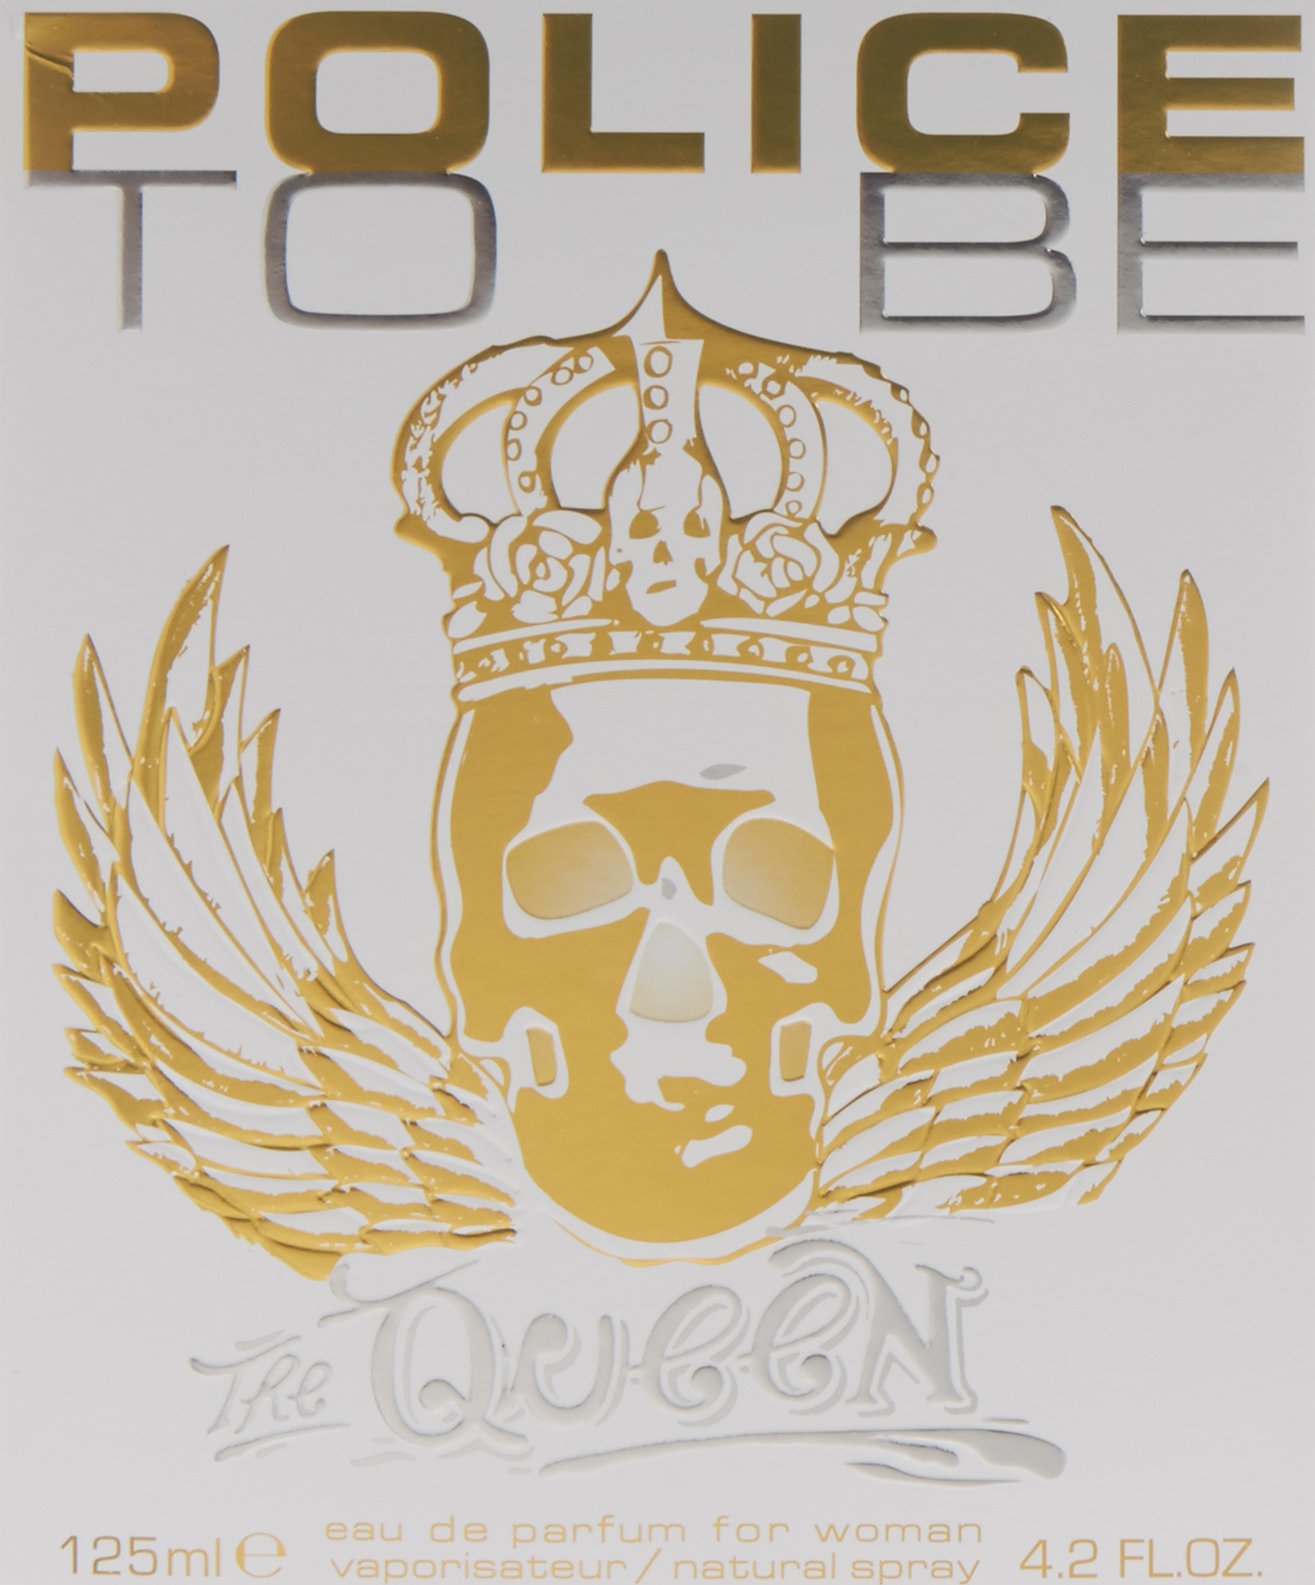 To Be the Queen by Police - Perfume for Women - Floral Chypre Scent - Opens with Mandarin and Red Fruits - Blended with Jasmine and Peach - for Ambitious and Unique Ladies - 4.2 oz EDP Spray